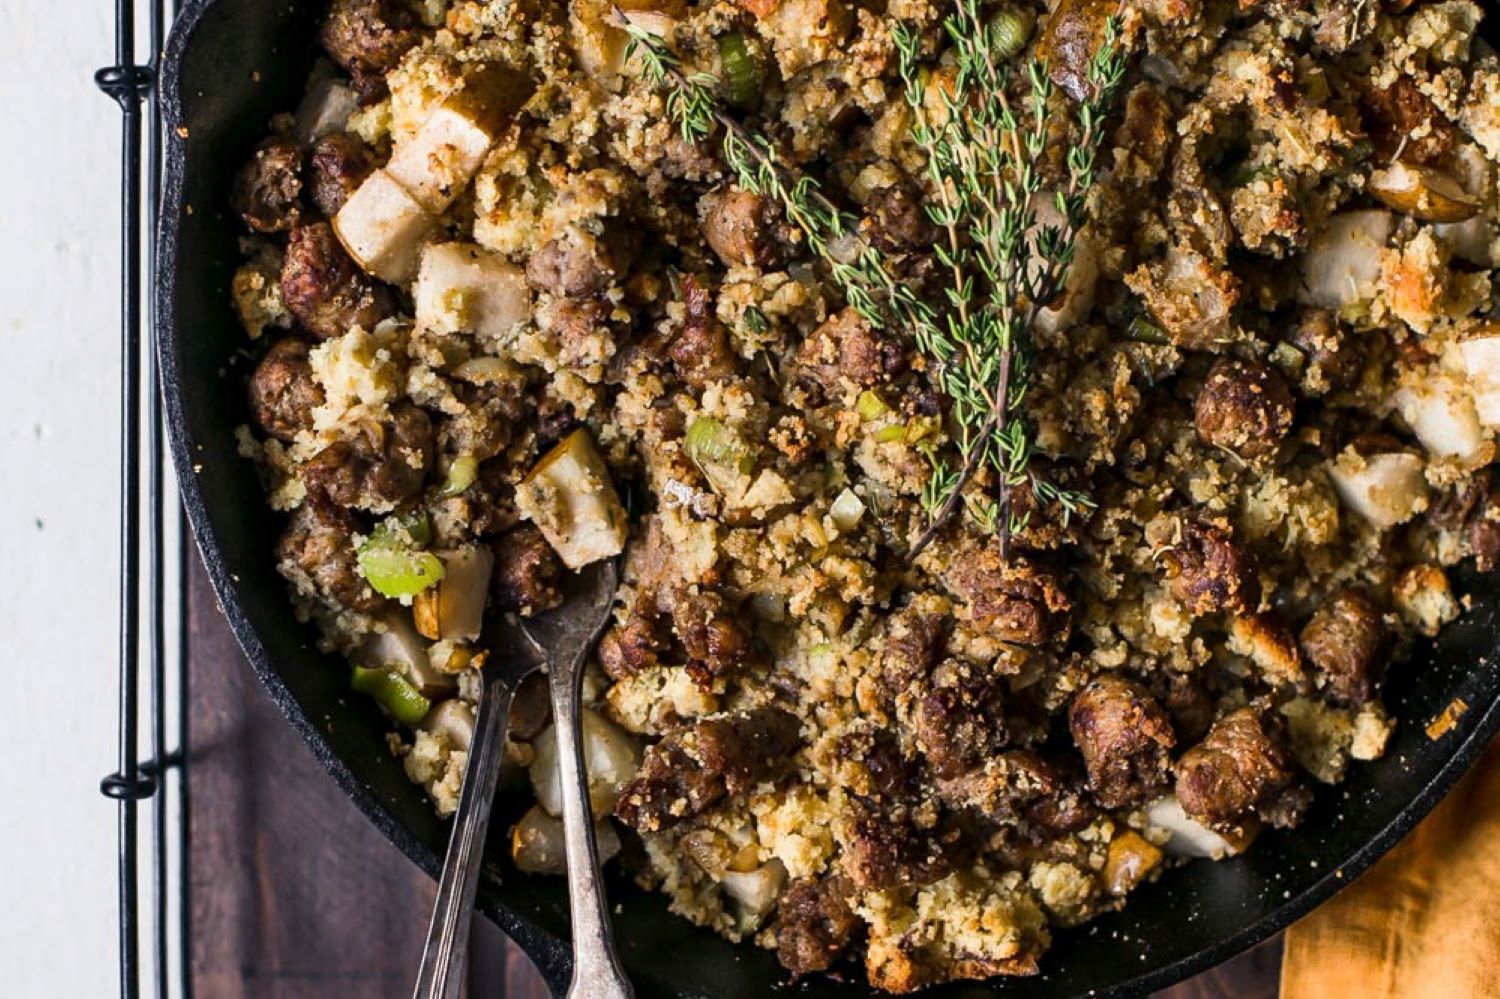 Get the Sausage and Leek Stuffing recipe